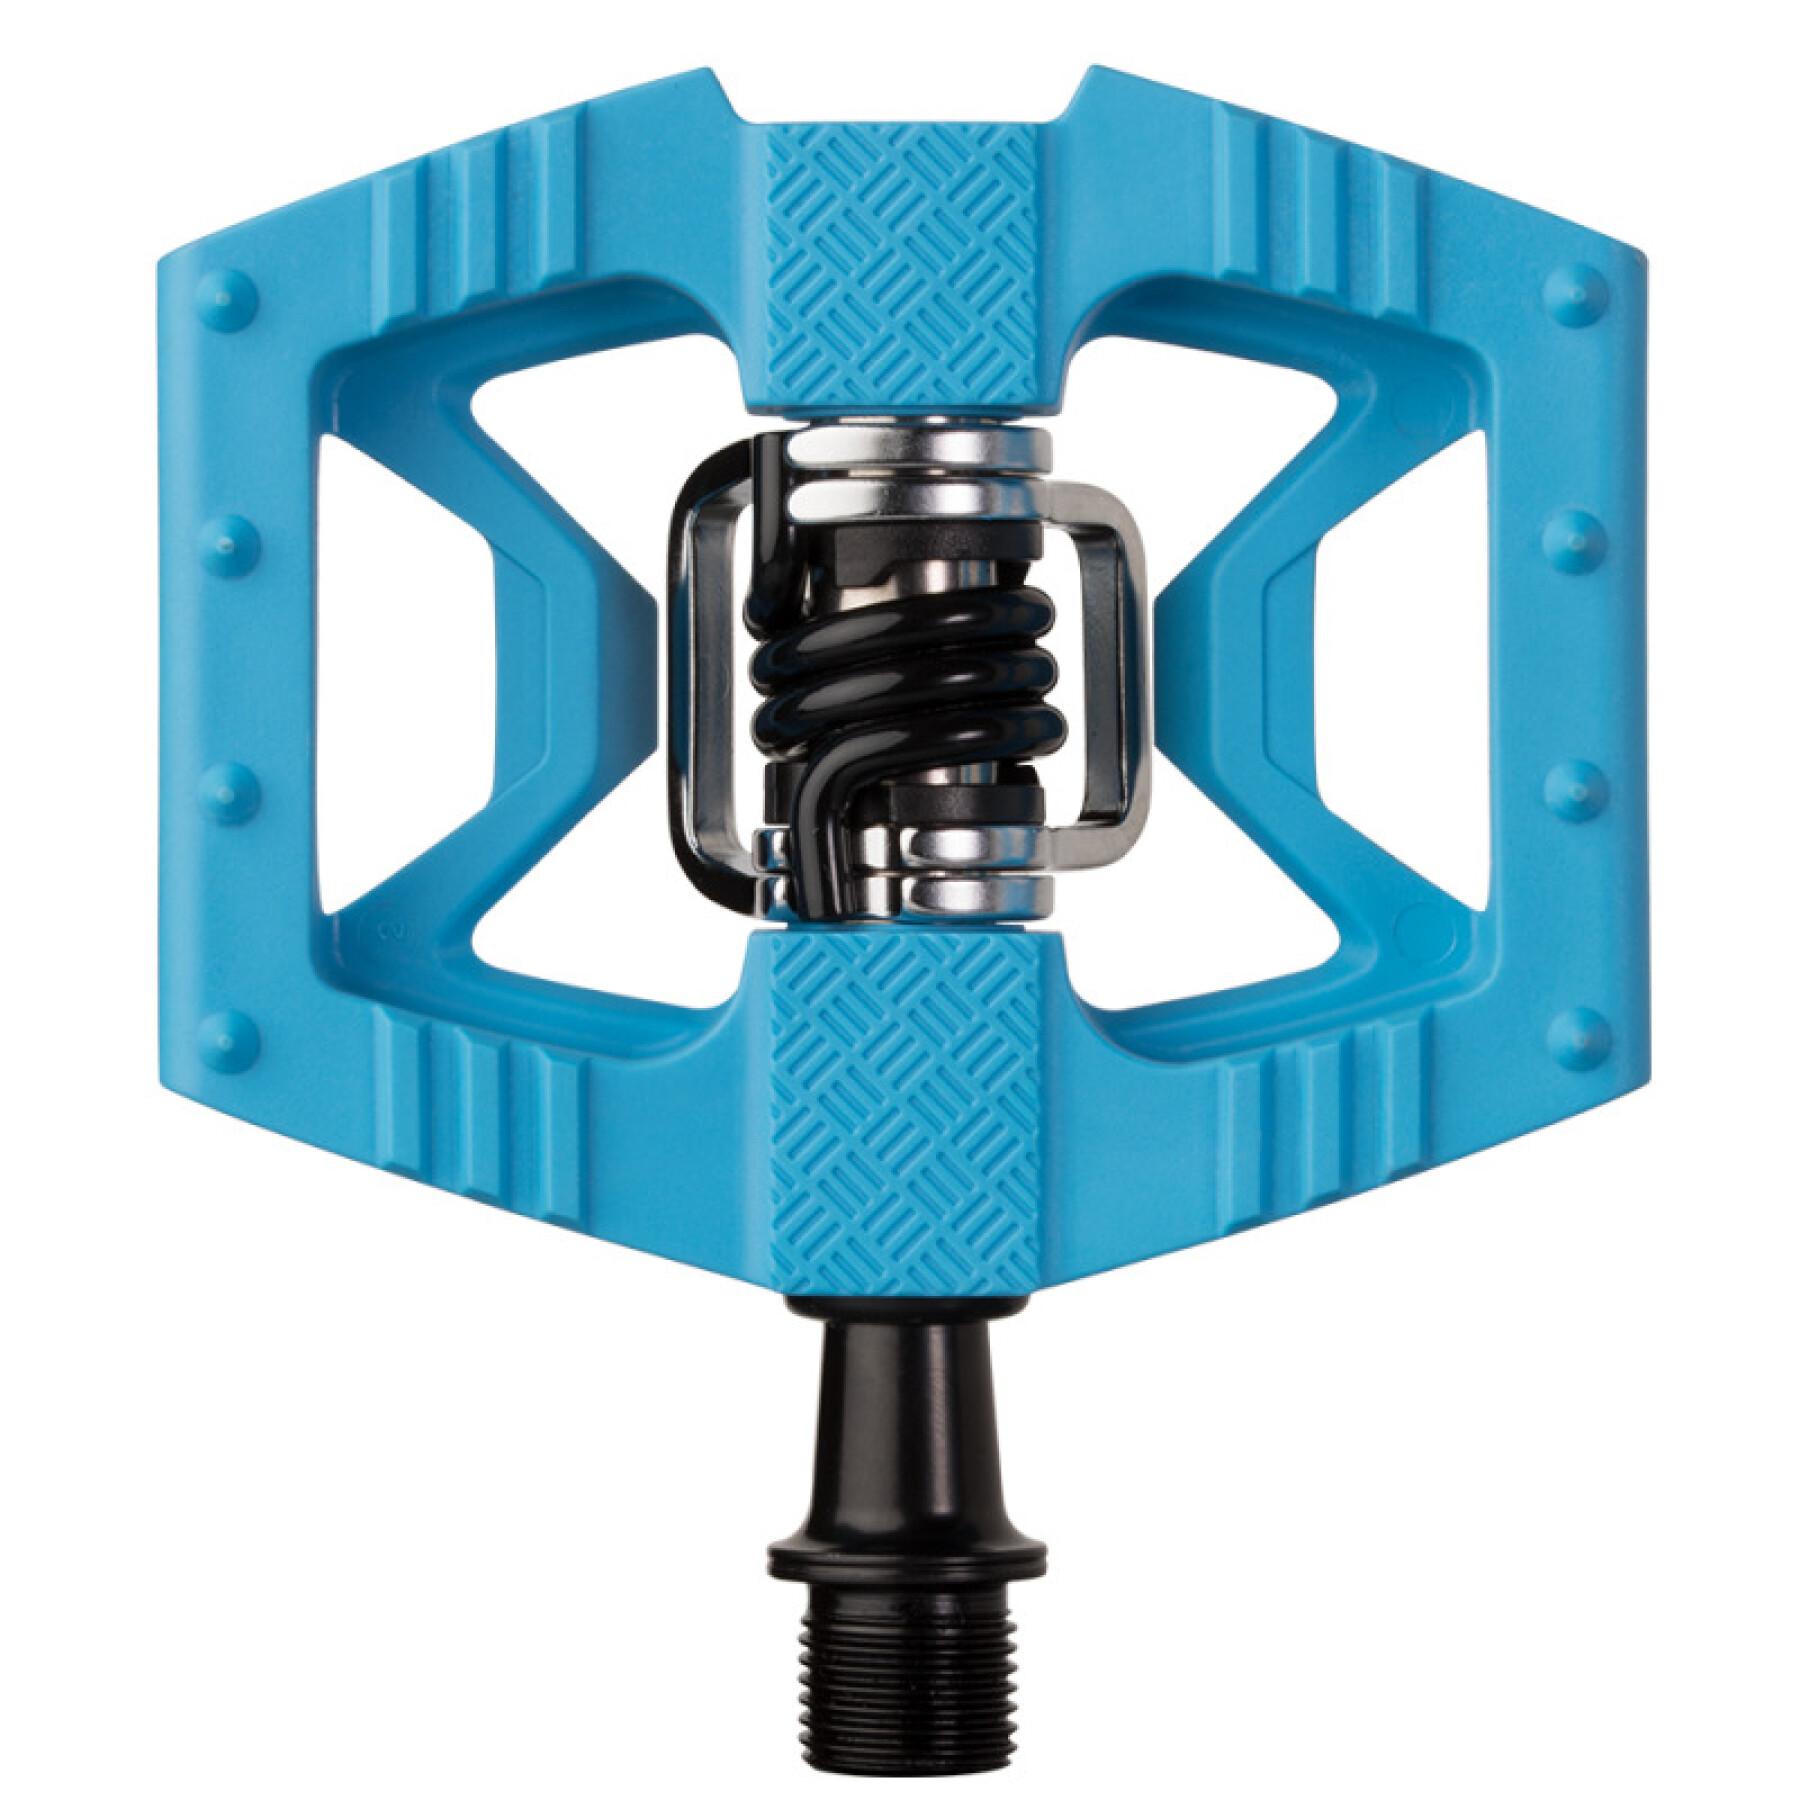 Double stroke pedals crankbrothers 1